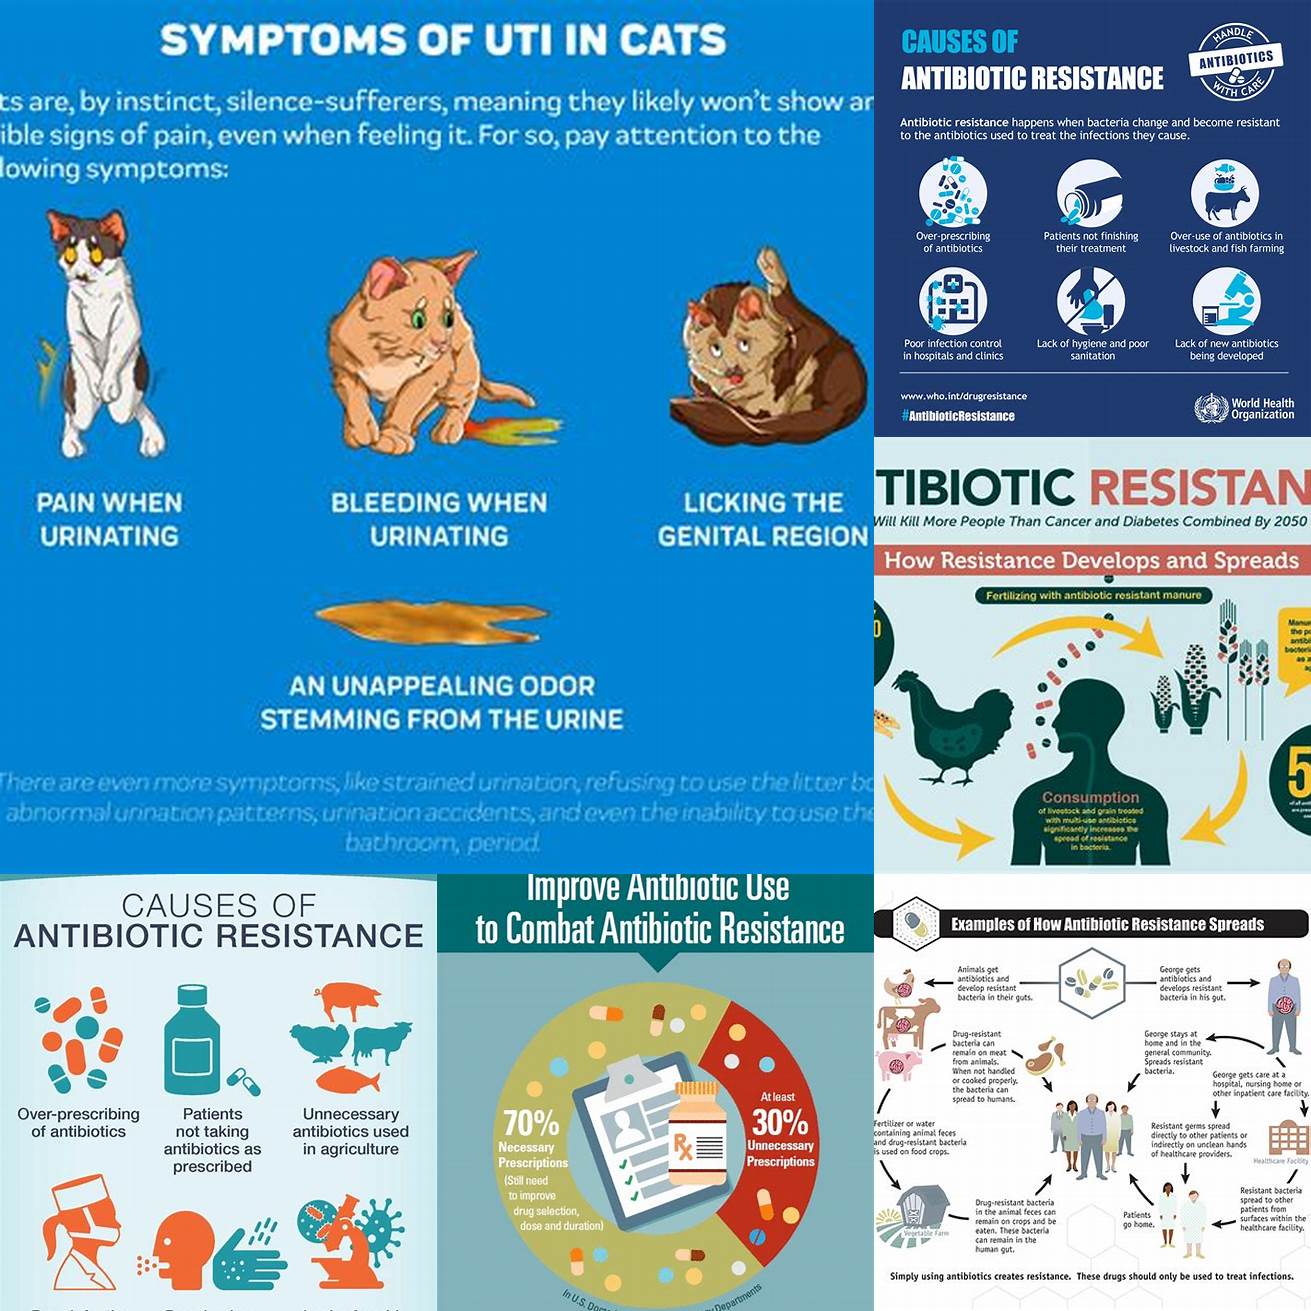 Complete the full course of treatment even if your cat starts to feel better This helps prevent antibiotic resistance and ensures the infection is fully treated